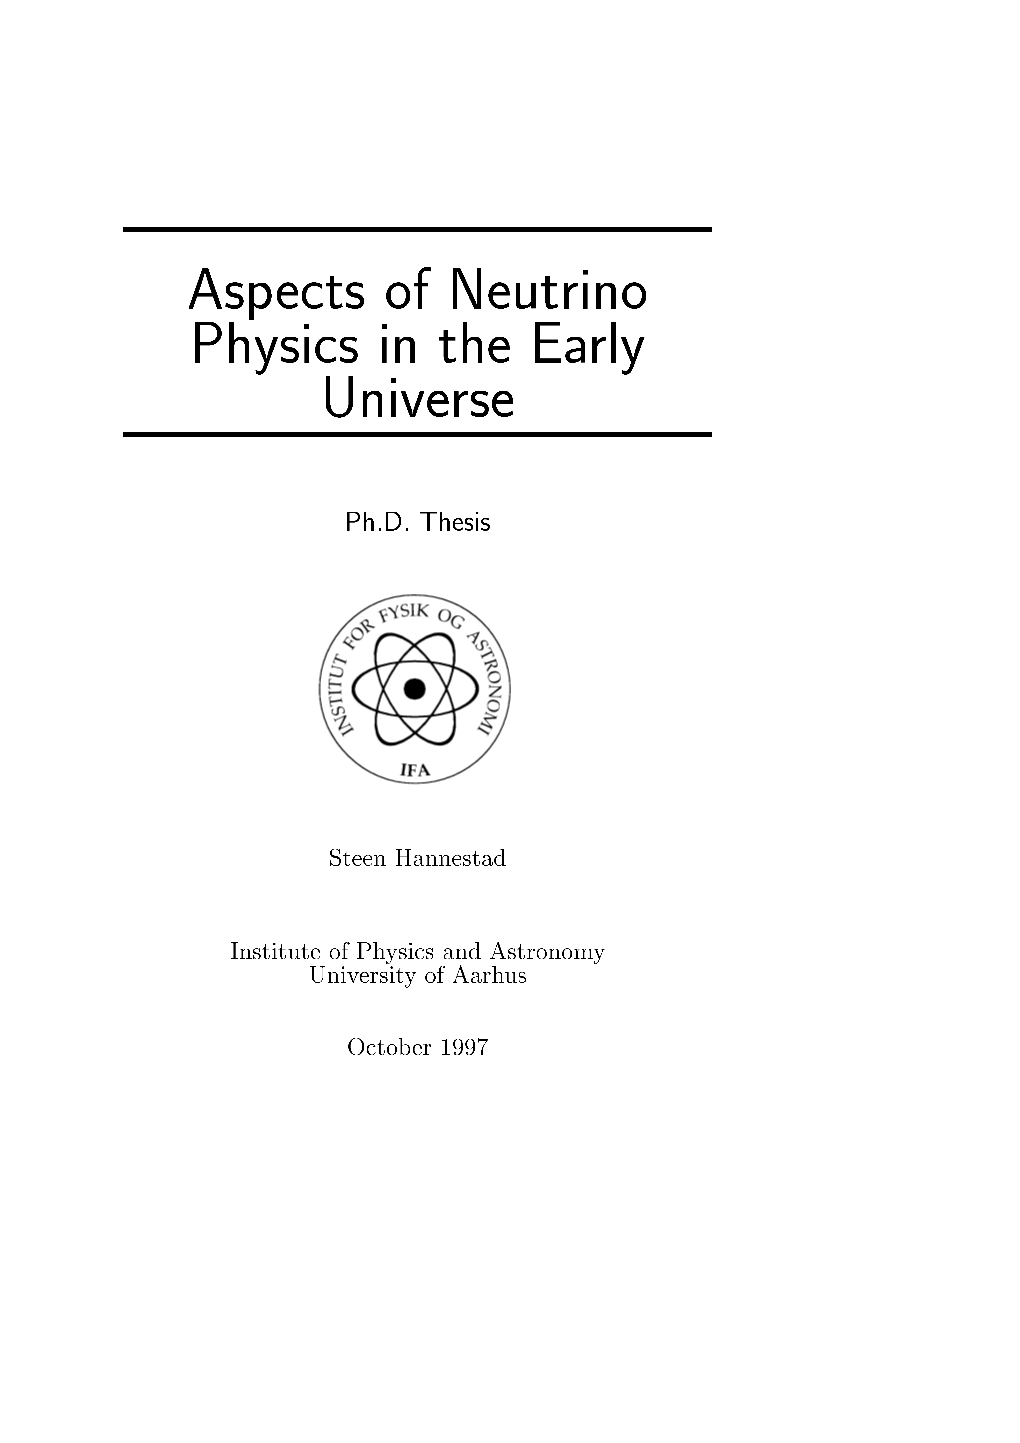 Aspects of Neutrino Physics in the Early Universe